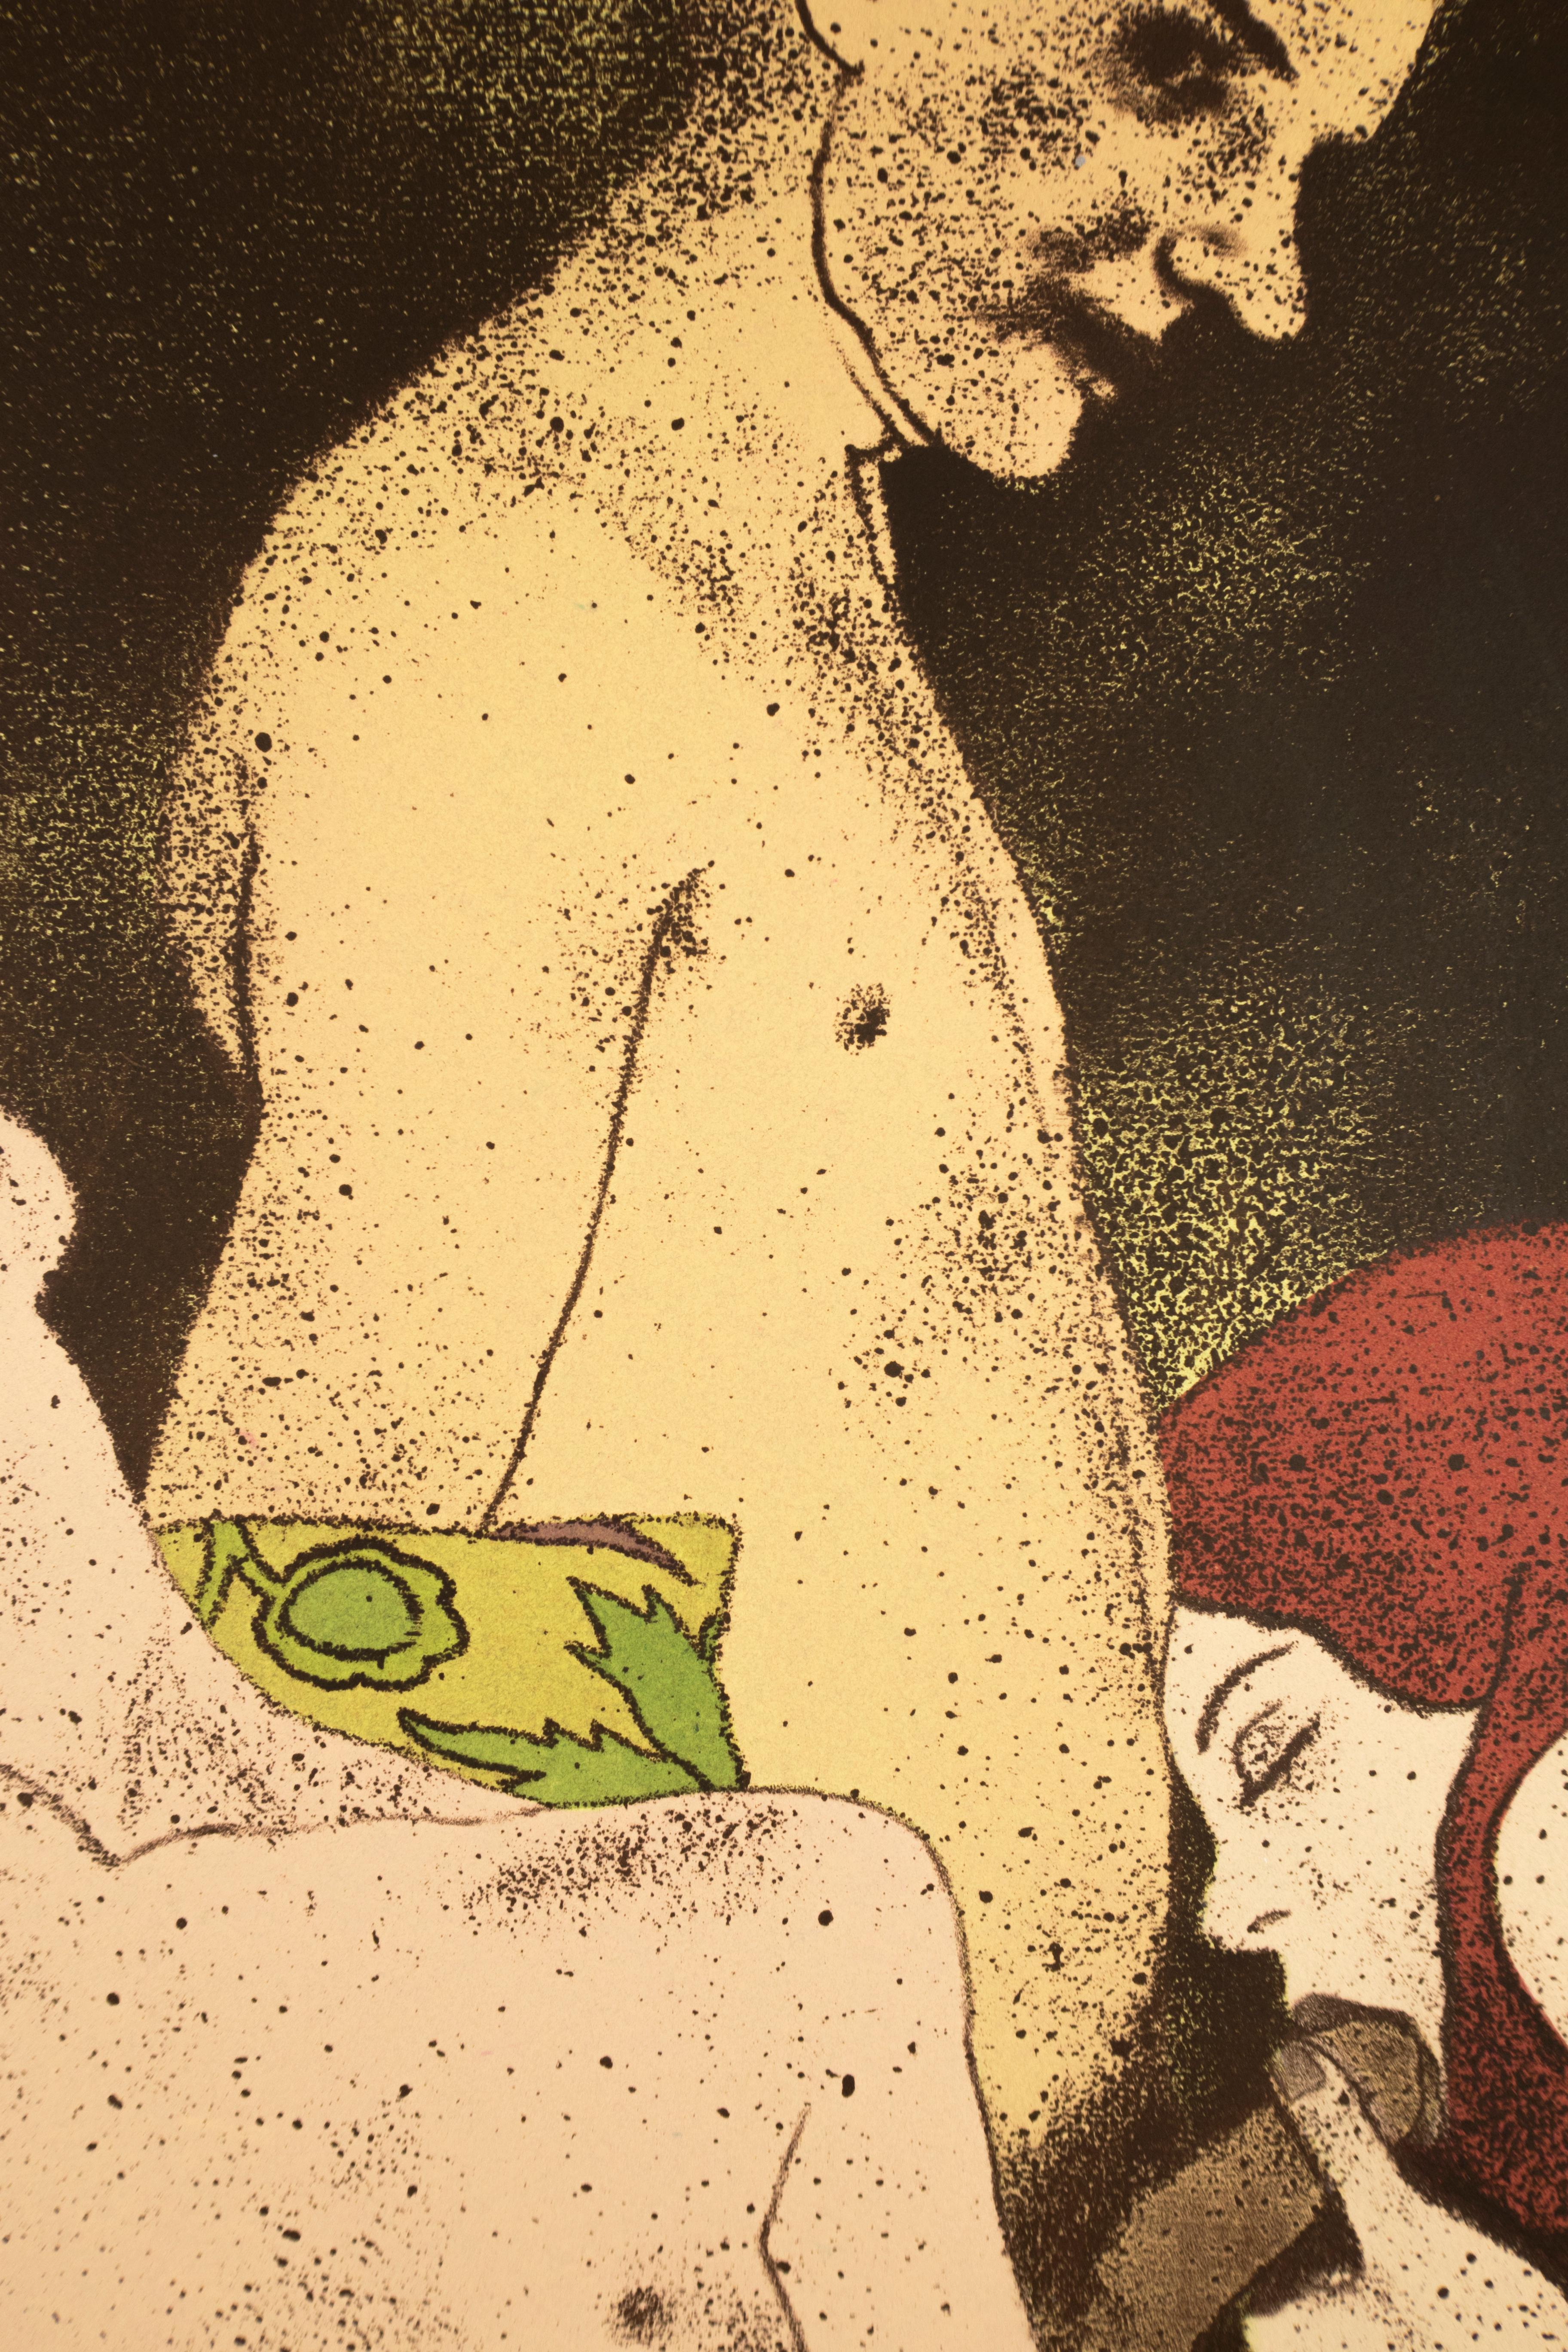 A Rash Act: erotic drawing of nude blonde, redhead, and man with art deco motifs - Print by Ronald Brooks Kitaj